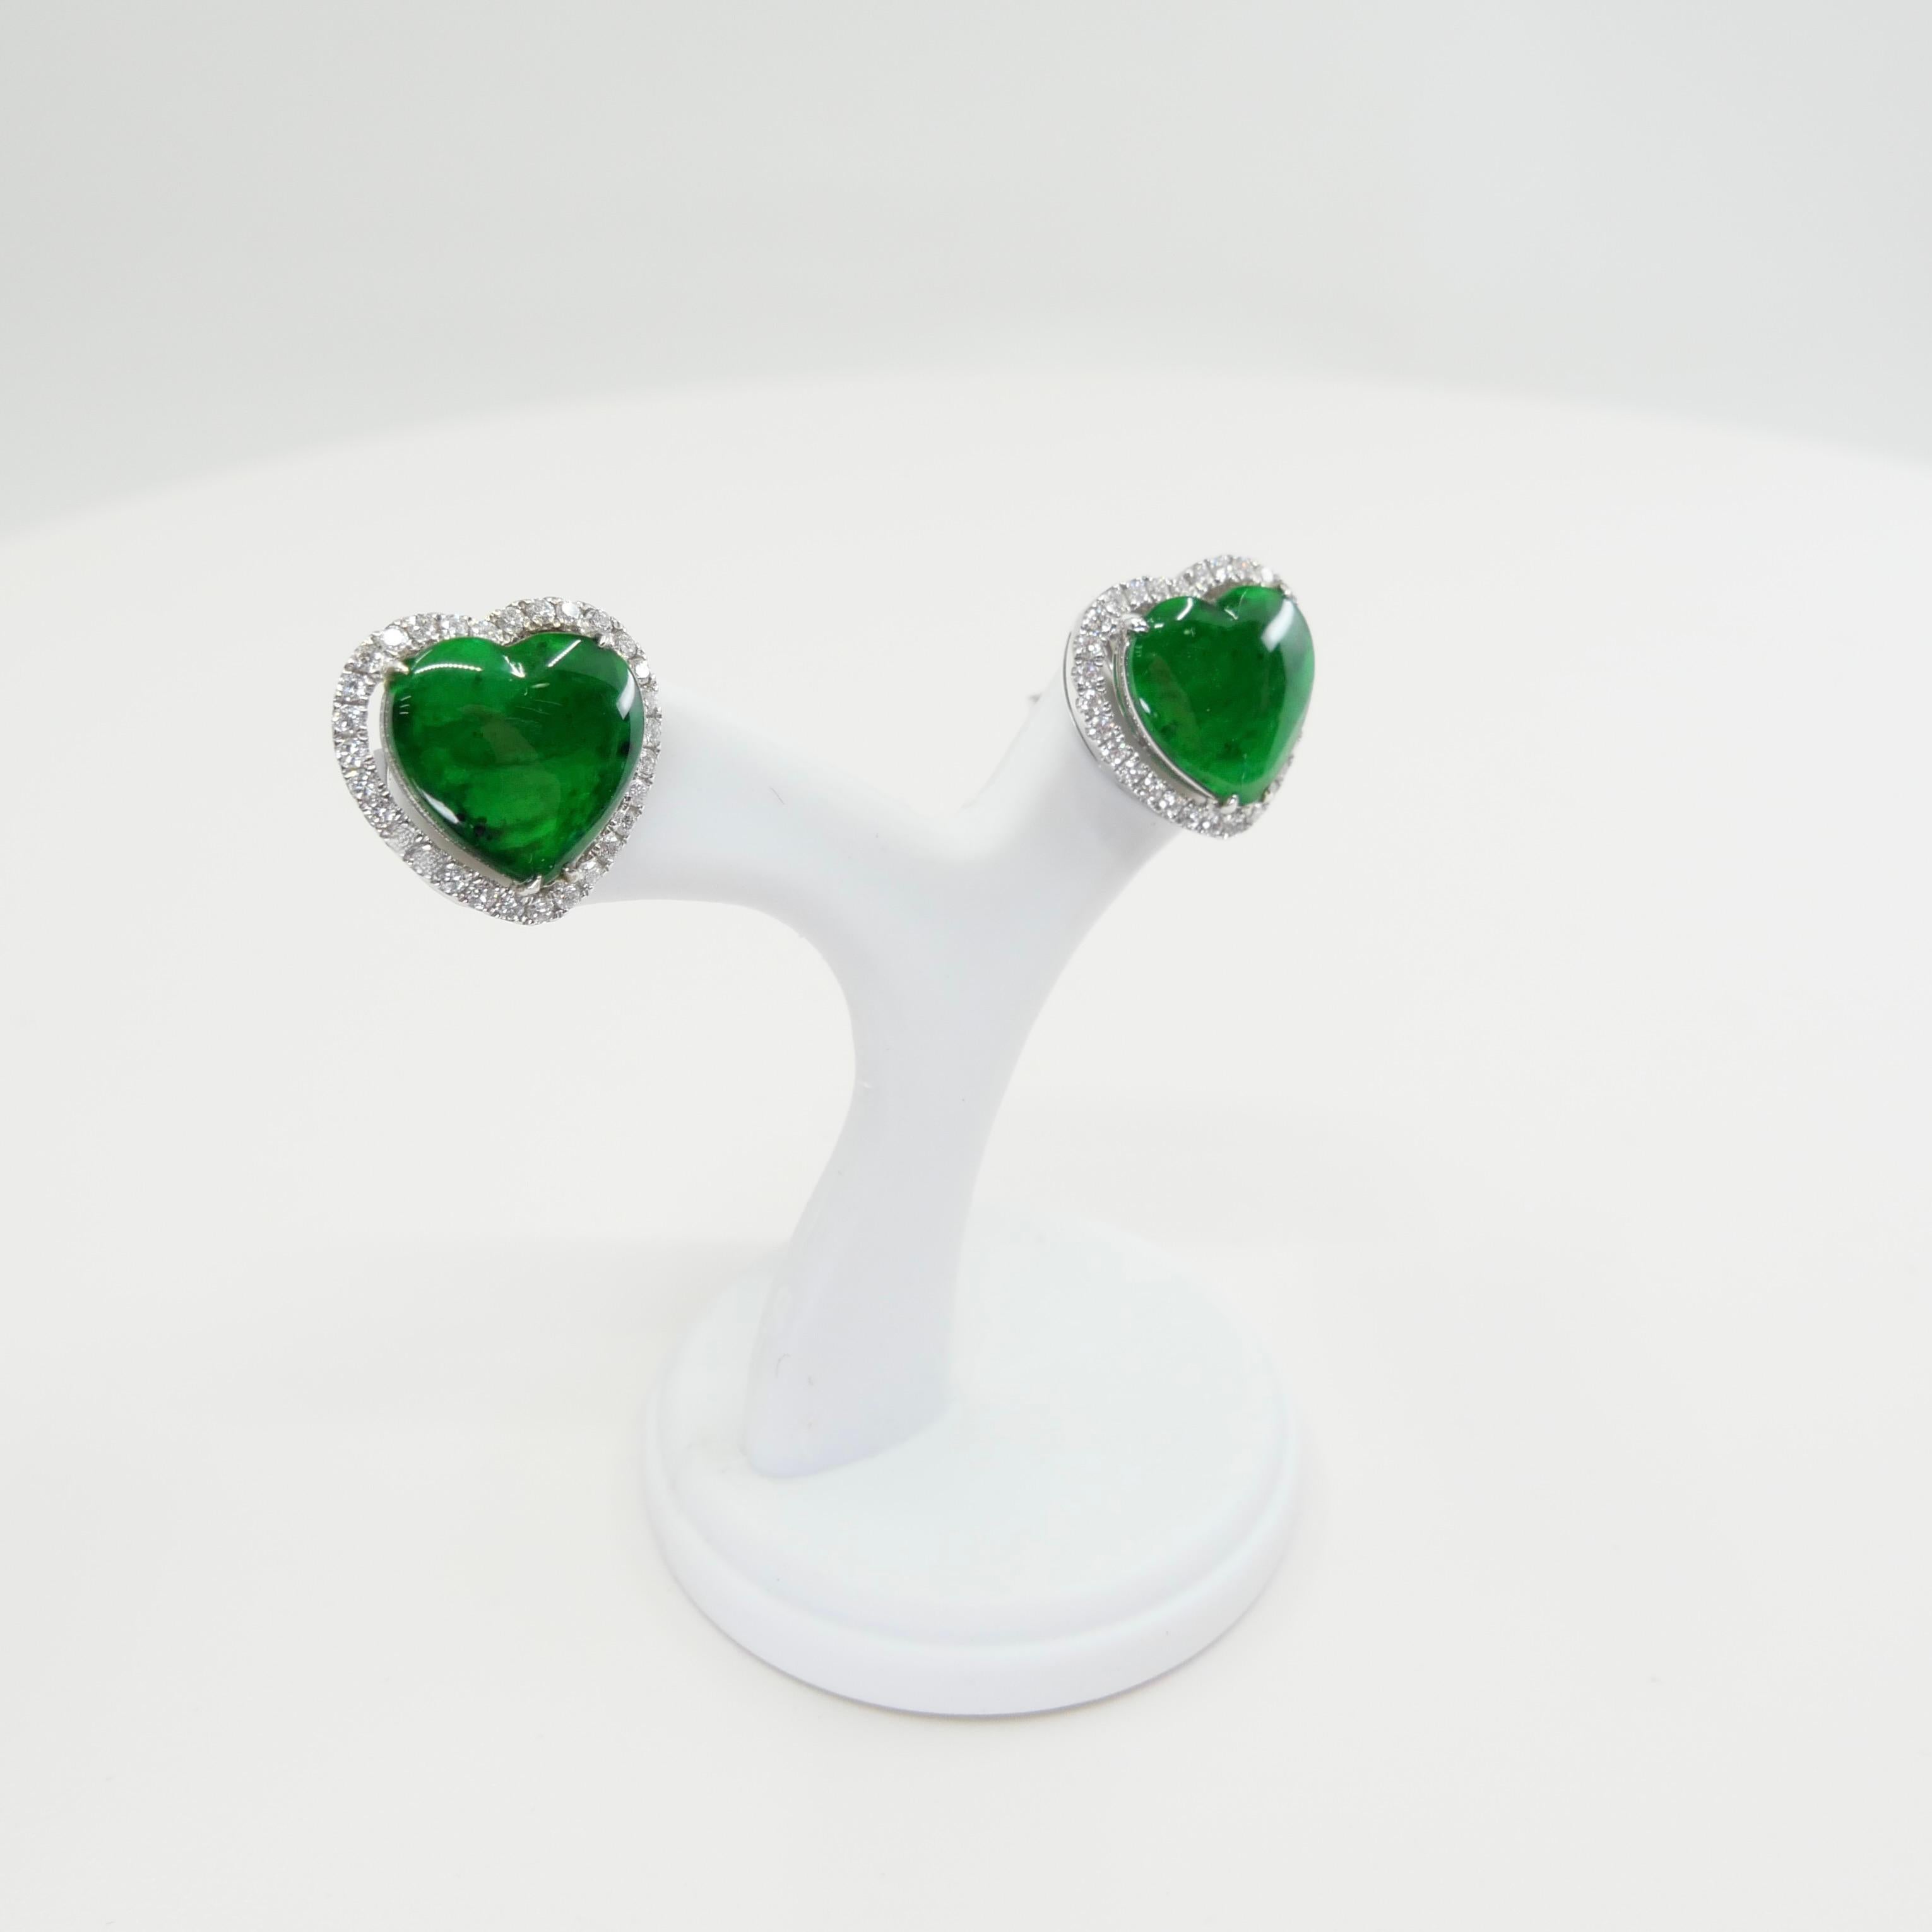 Certified Type A Jadeite and Diamond Earrings Imperial Jade, Spinach Green Color 8